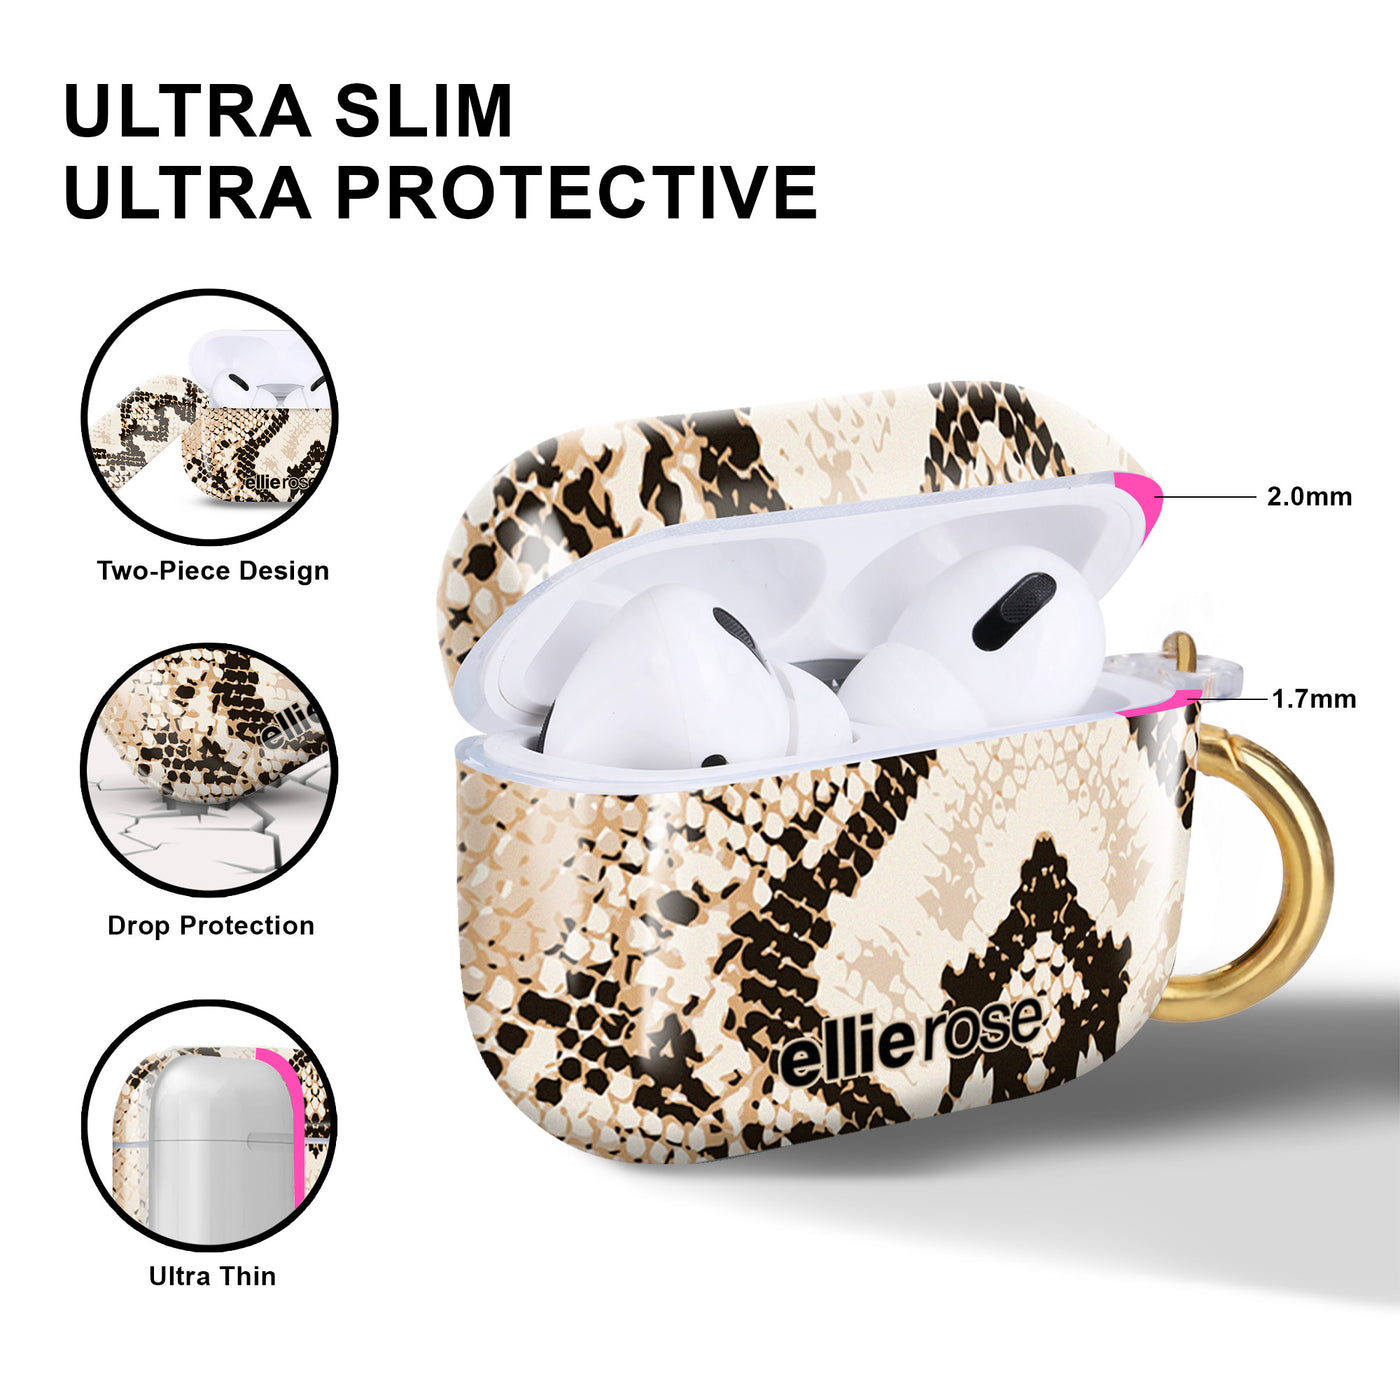 two piece design, drop protection, ultra slim and ultra protective Snakeskin Airpods Pro Case